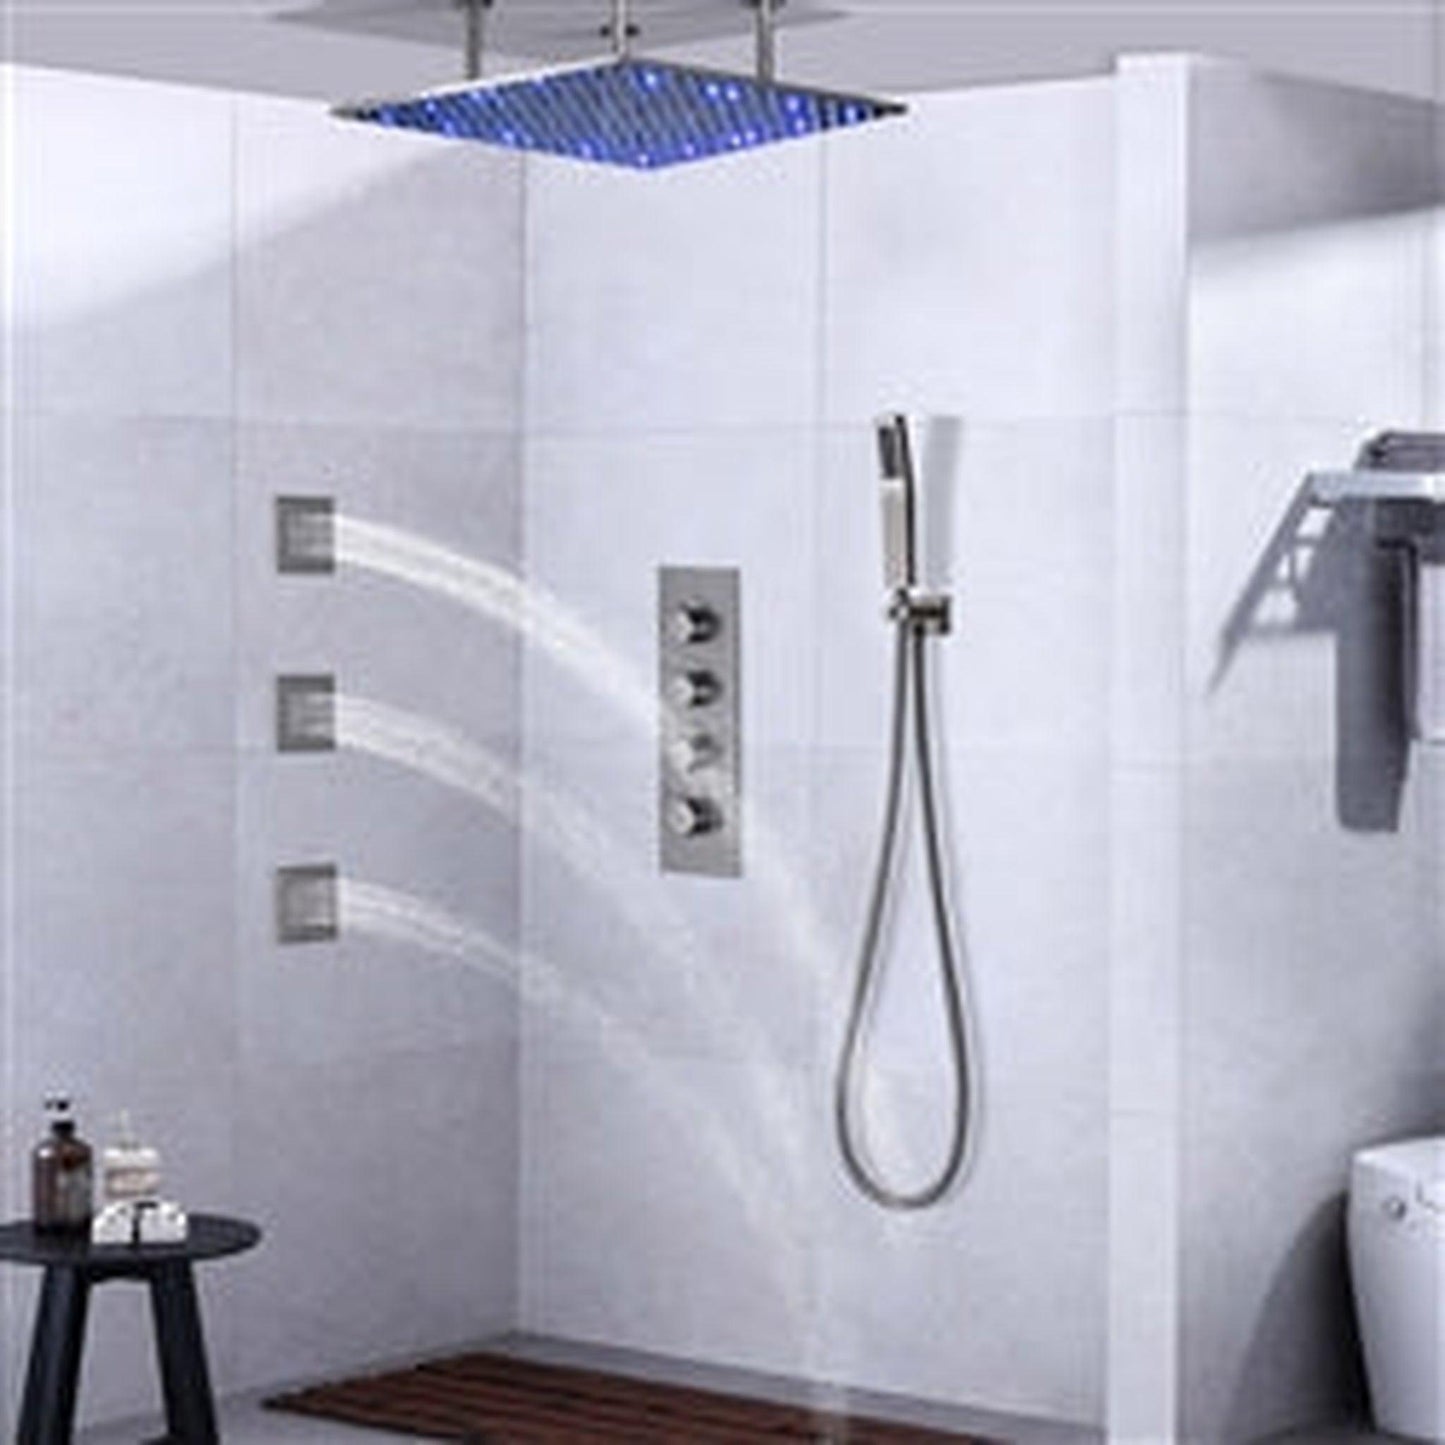 Fontana 40" x 20" Brushed Nickel Ceiling Mounted Thermostatic Valve Shower System With 3-Jet Sprays, Hand Shower and Water Powered LED Lights